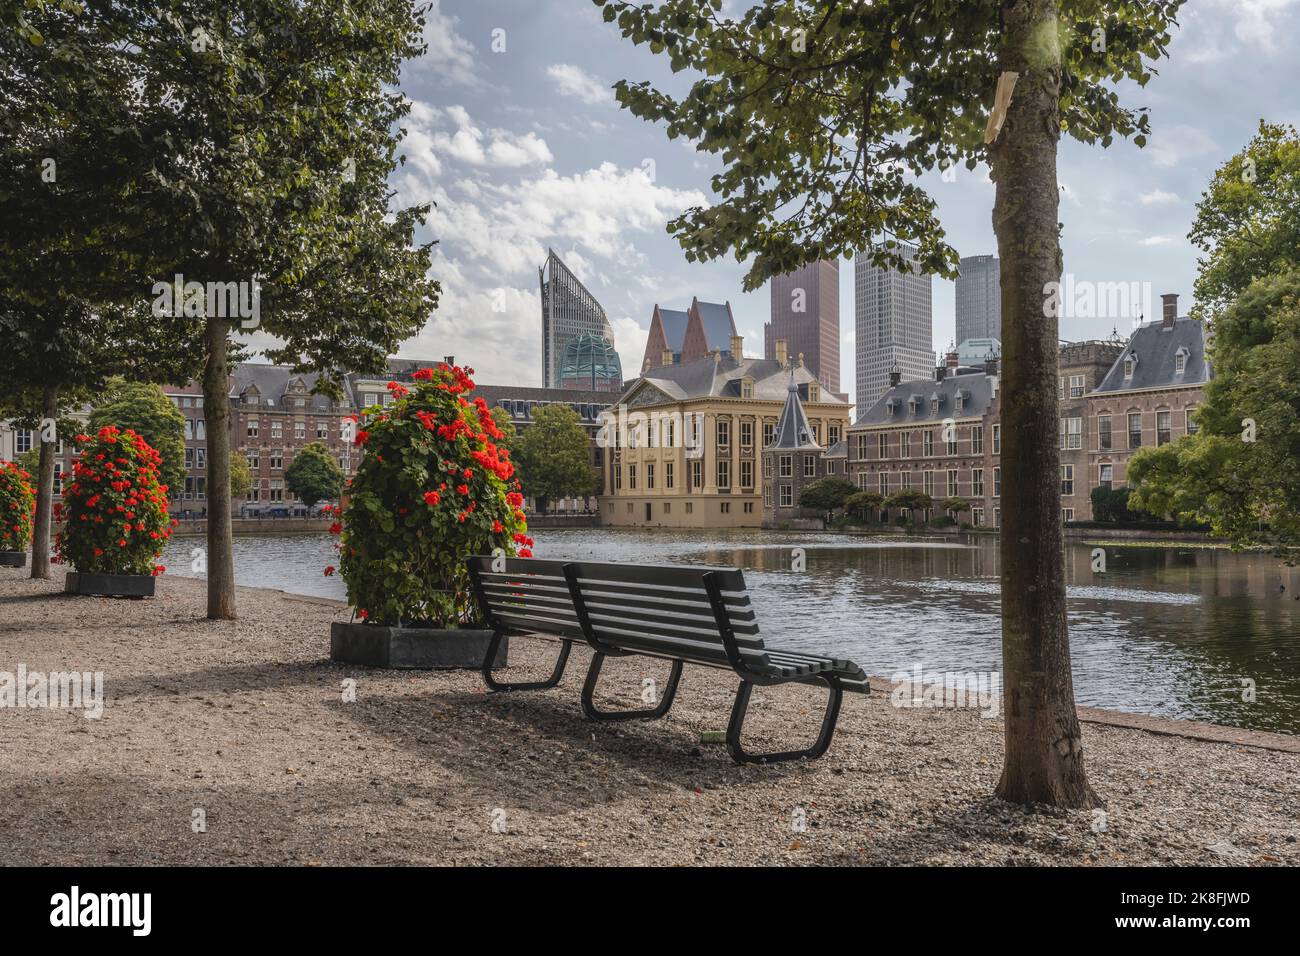 Netherlands, South Holland, The Hague, Park bench in front of Hofvijver lake canal with Mauritshuis museum in background Stock Photo